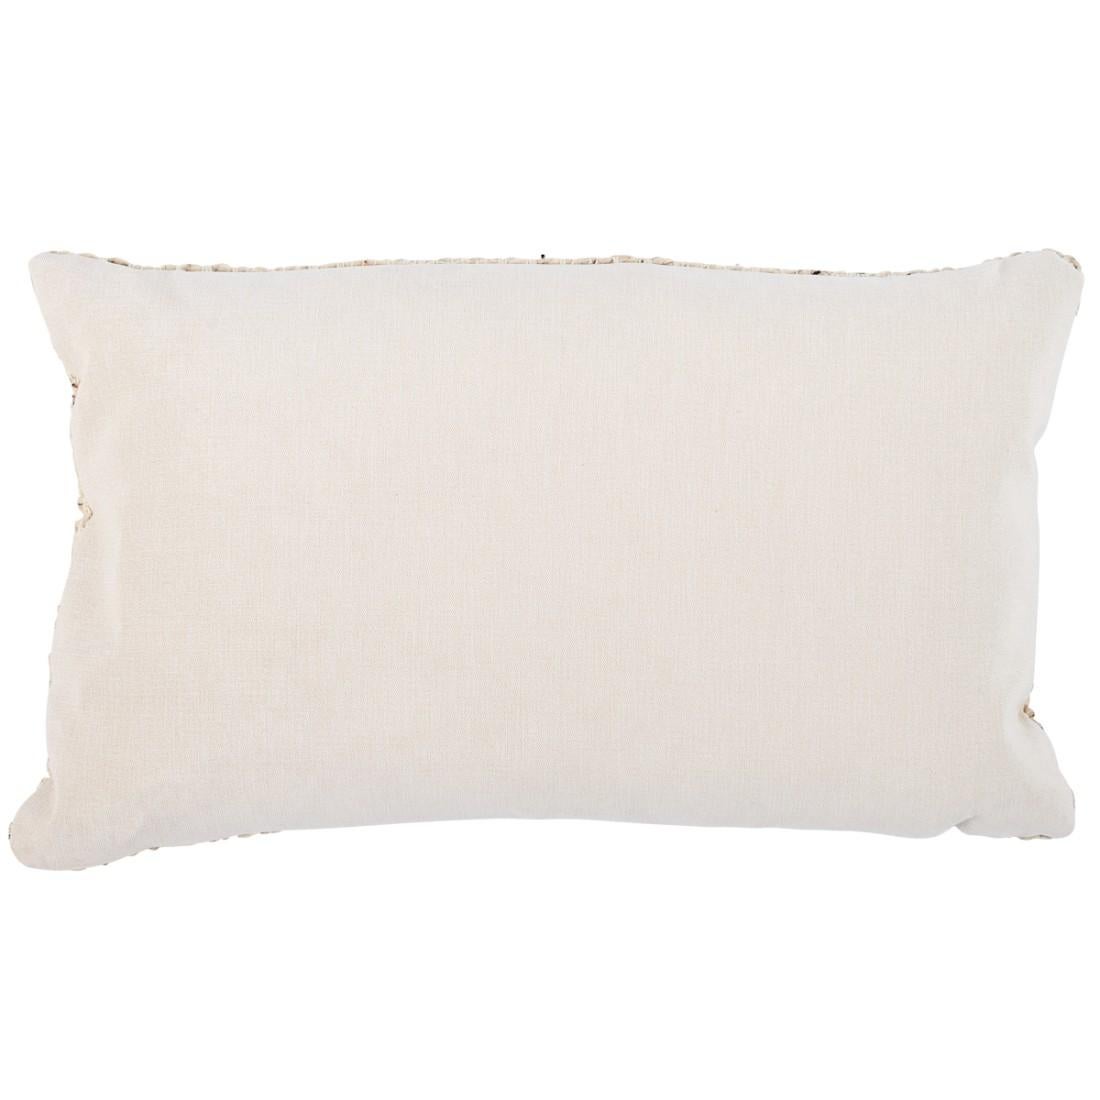 The Tweeds pillow by Shed Textile Company uses gorgeously subtle yarns whose muted, shifting tones add a luxurious texture reminiscent of beach stones and wheat fields. Individually hand woven with a mixed fiber backing. Pillow includes a